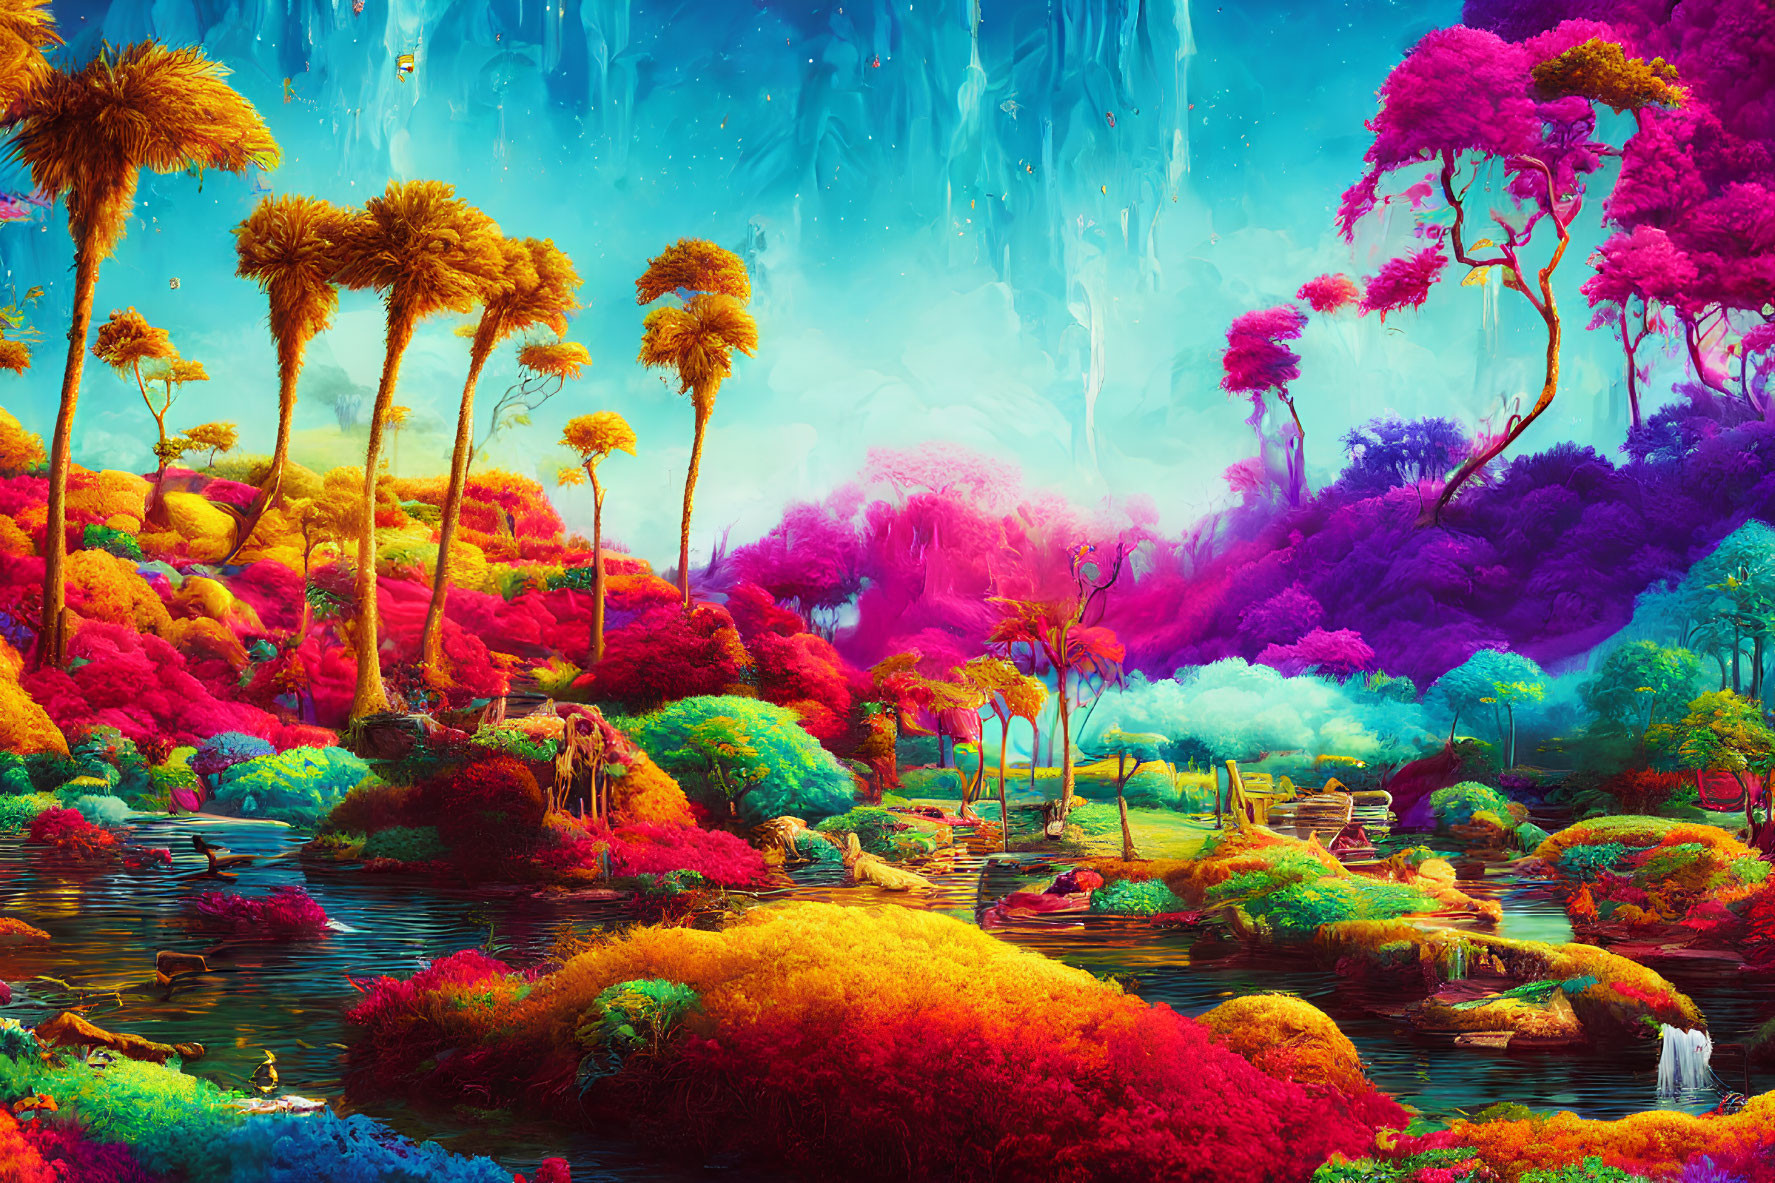 Colorful surreal landscape with trees, pond, and waterfalls under blue sky